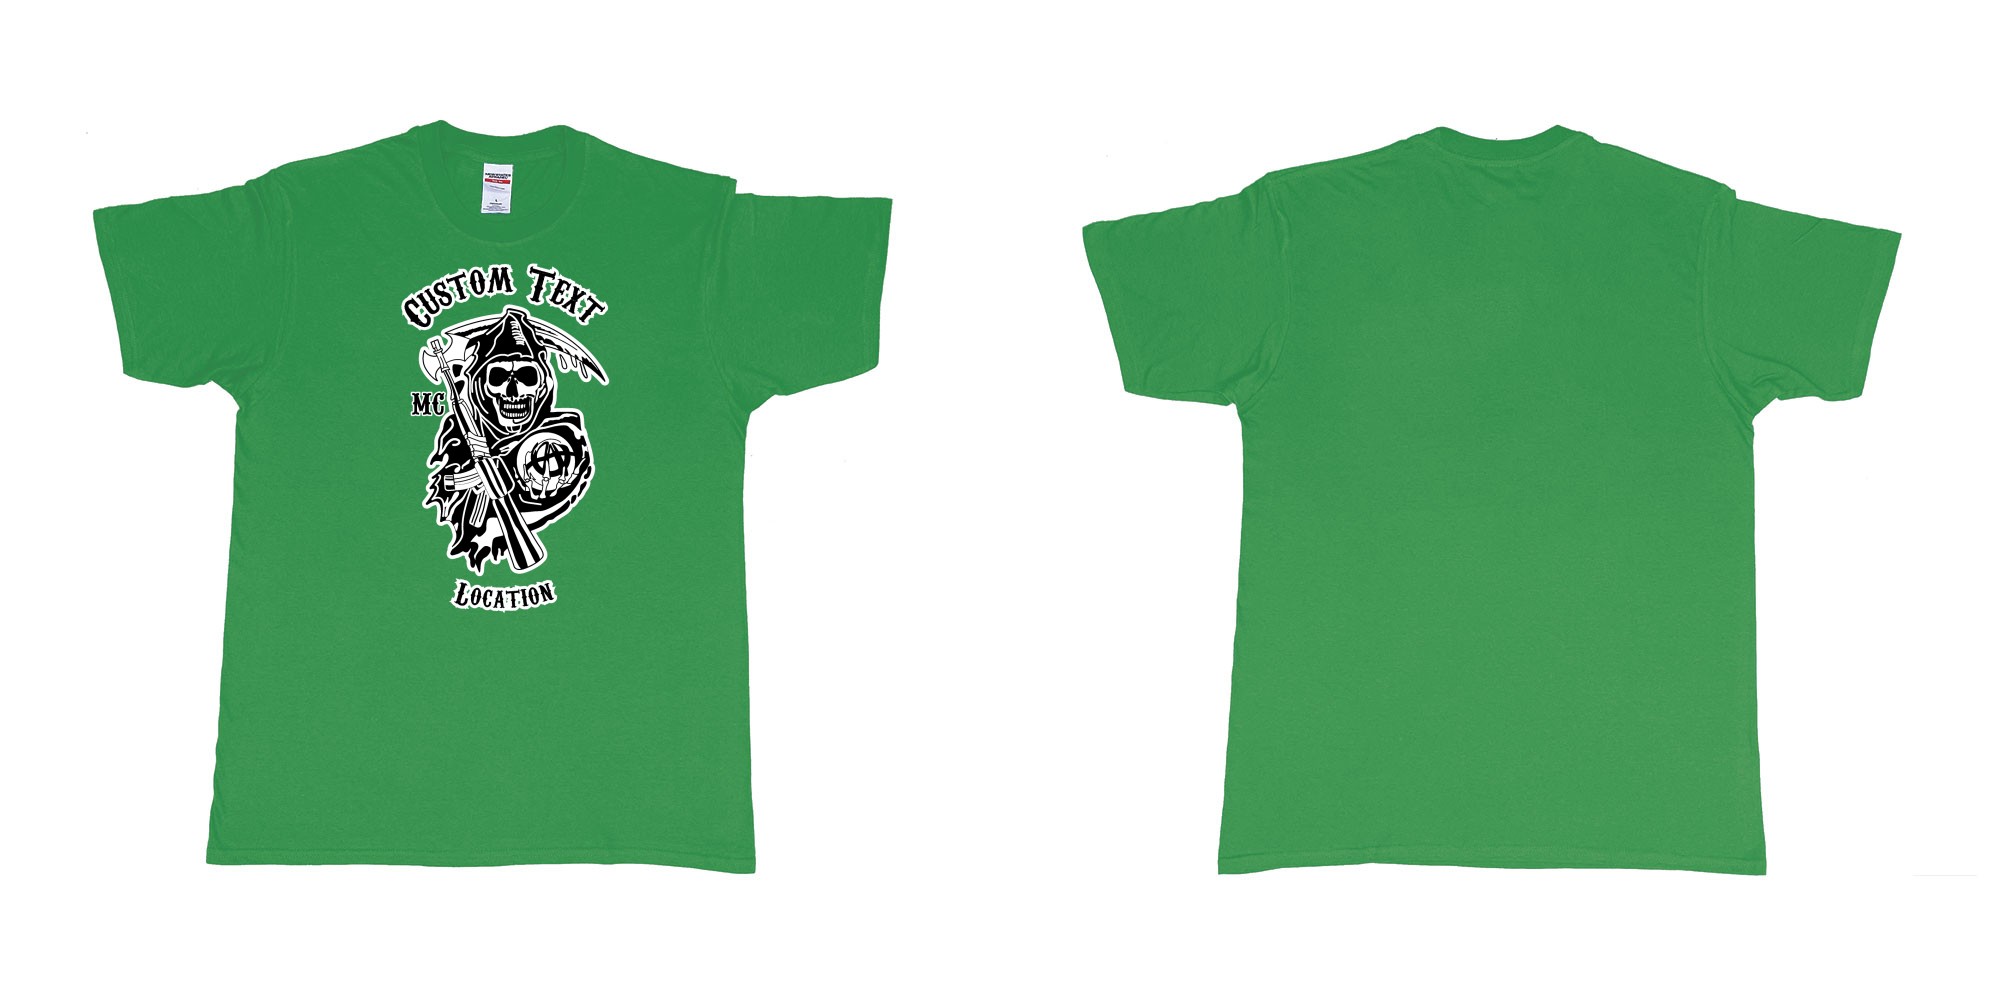 Custom tshirt design son of anarchy logo custom text in fabric color irish-green choice your own text made in Bali by The Pirate Way